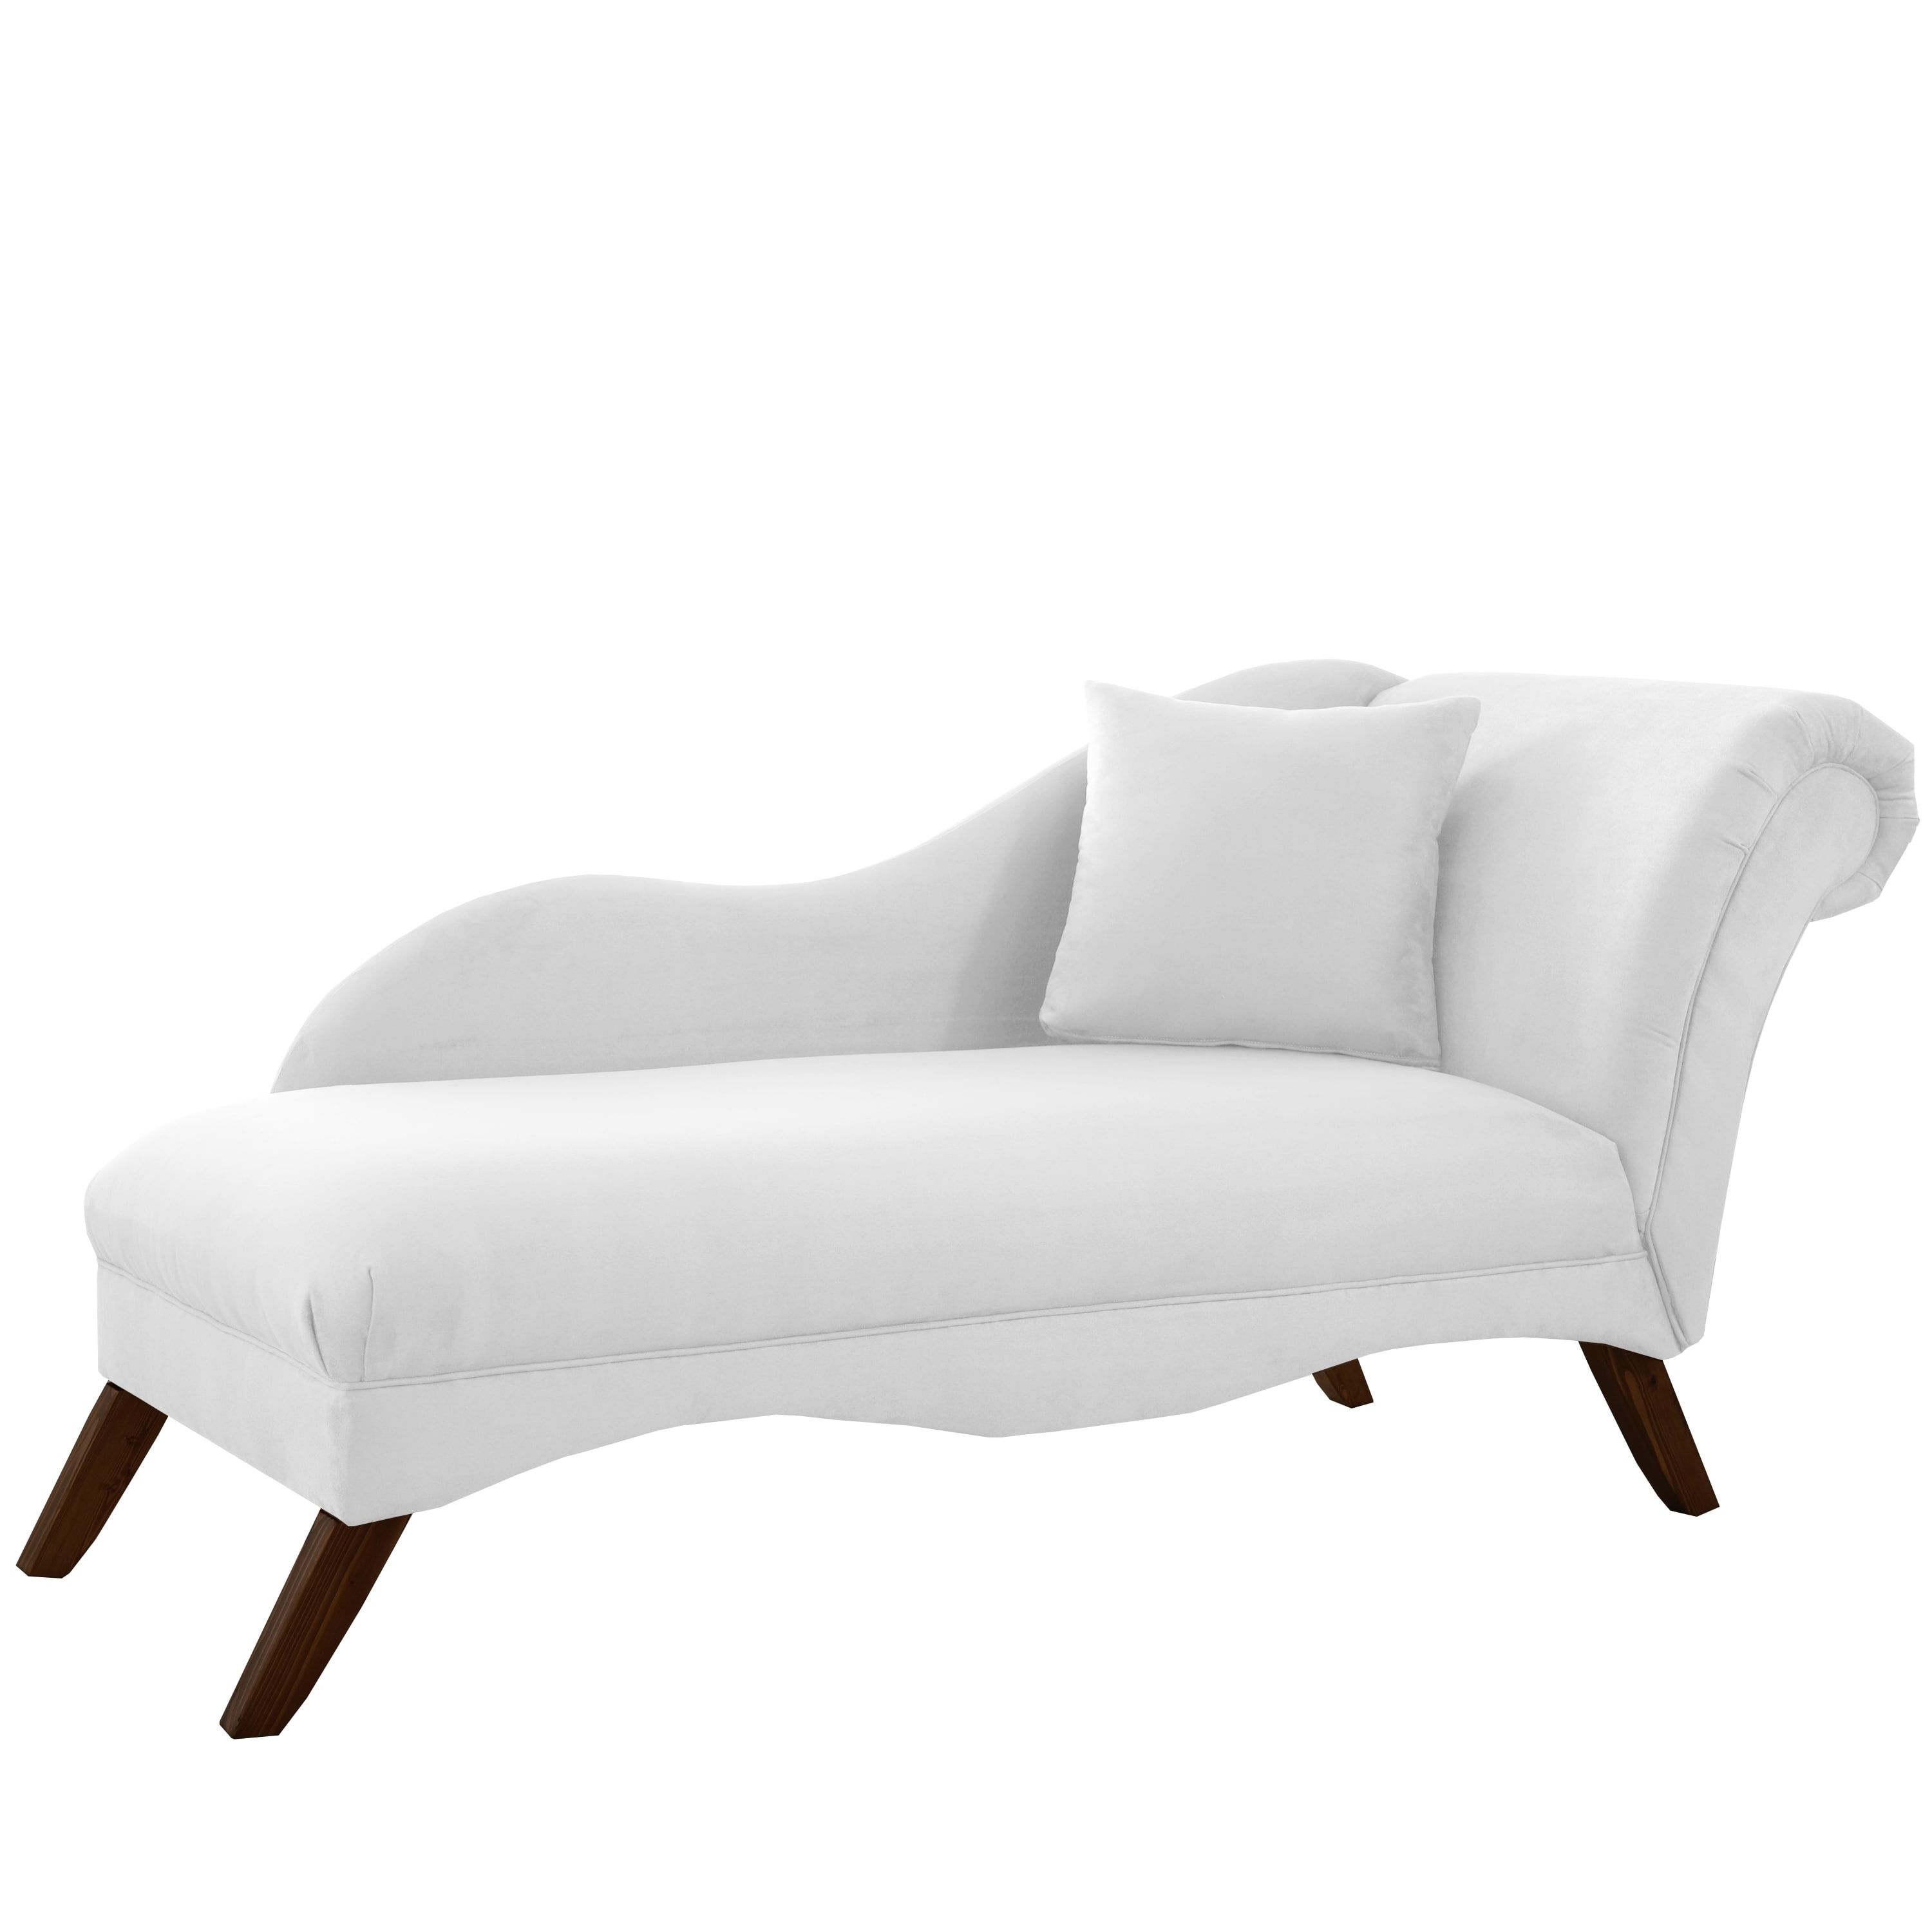 Skyline Chaises In Most Current Skyline Furniture Chaise Lounge In Velvet White – Free Shipping (View 8 of 15)